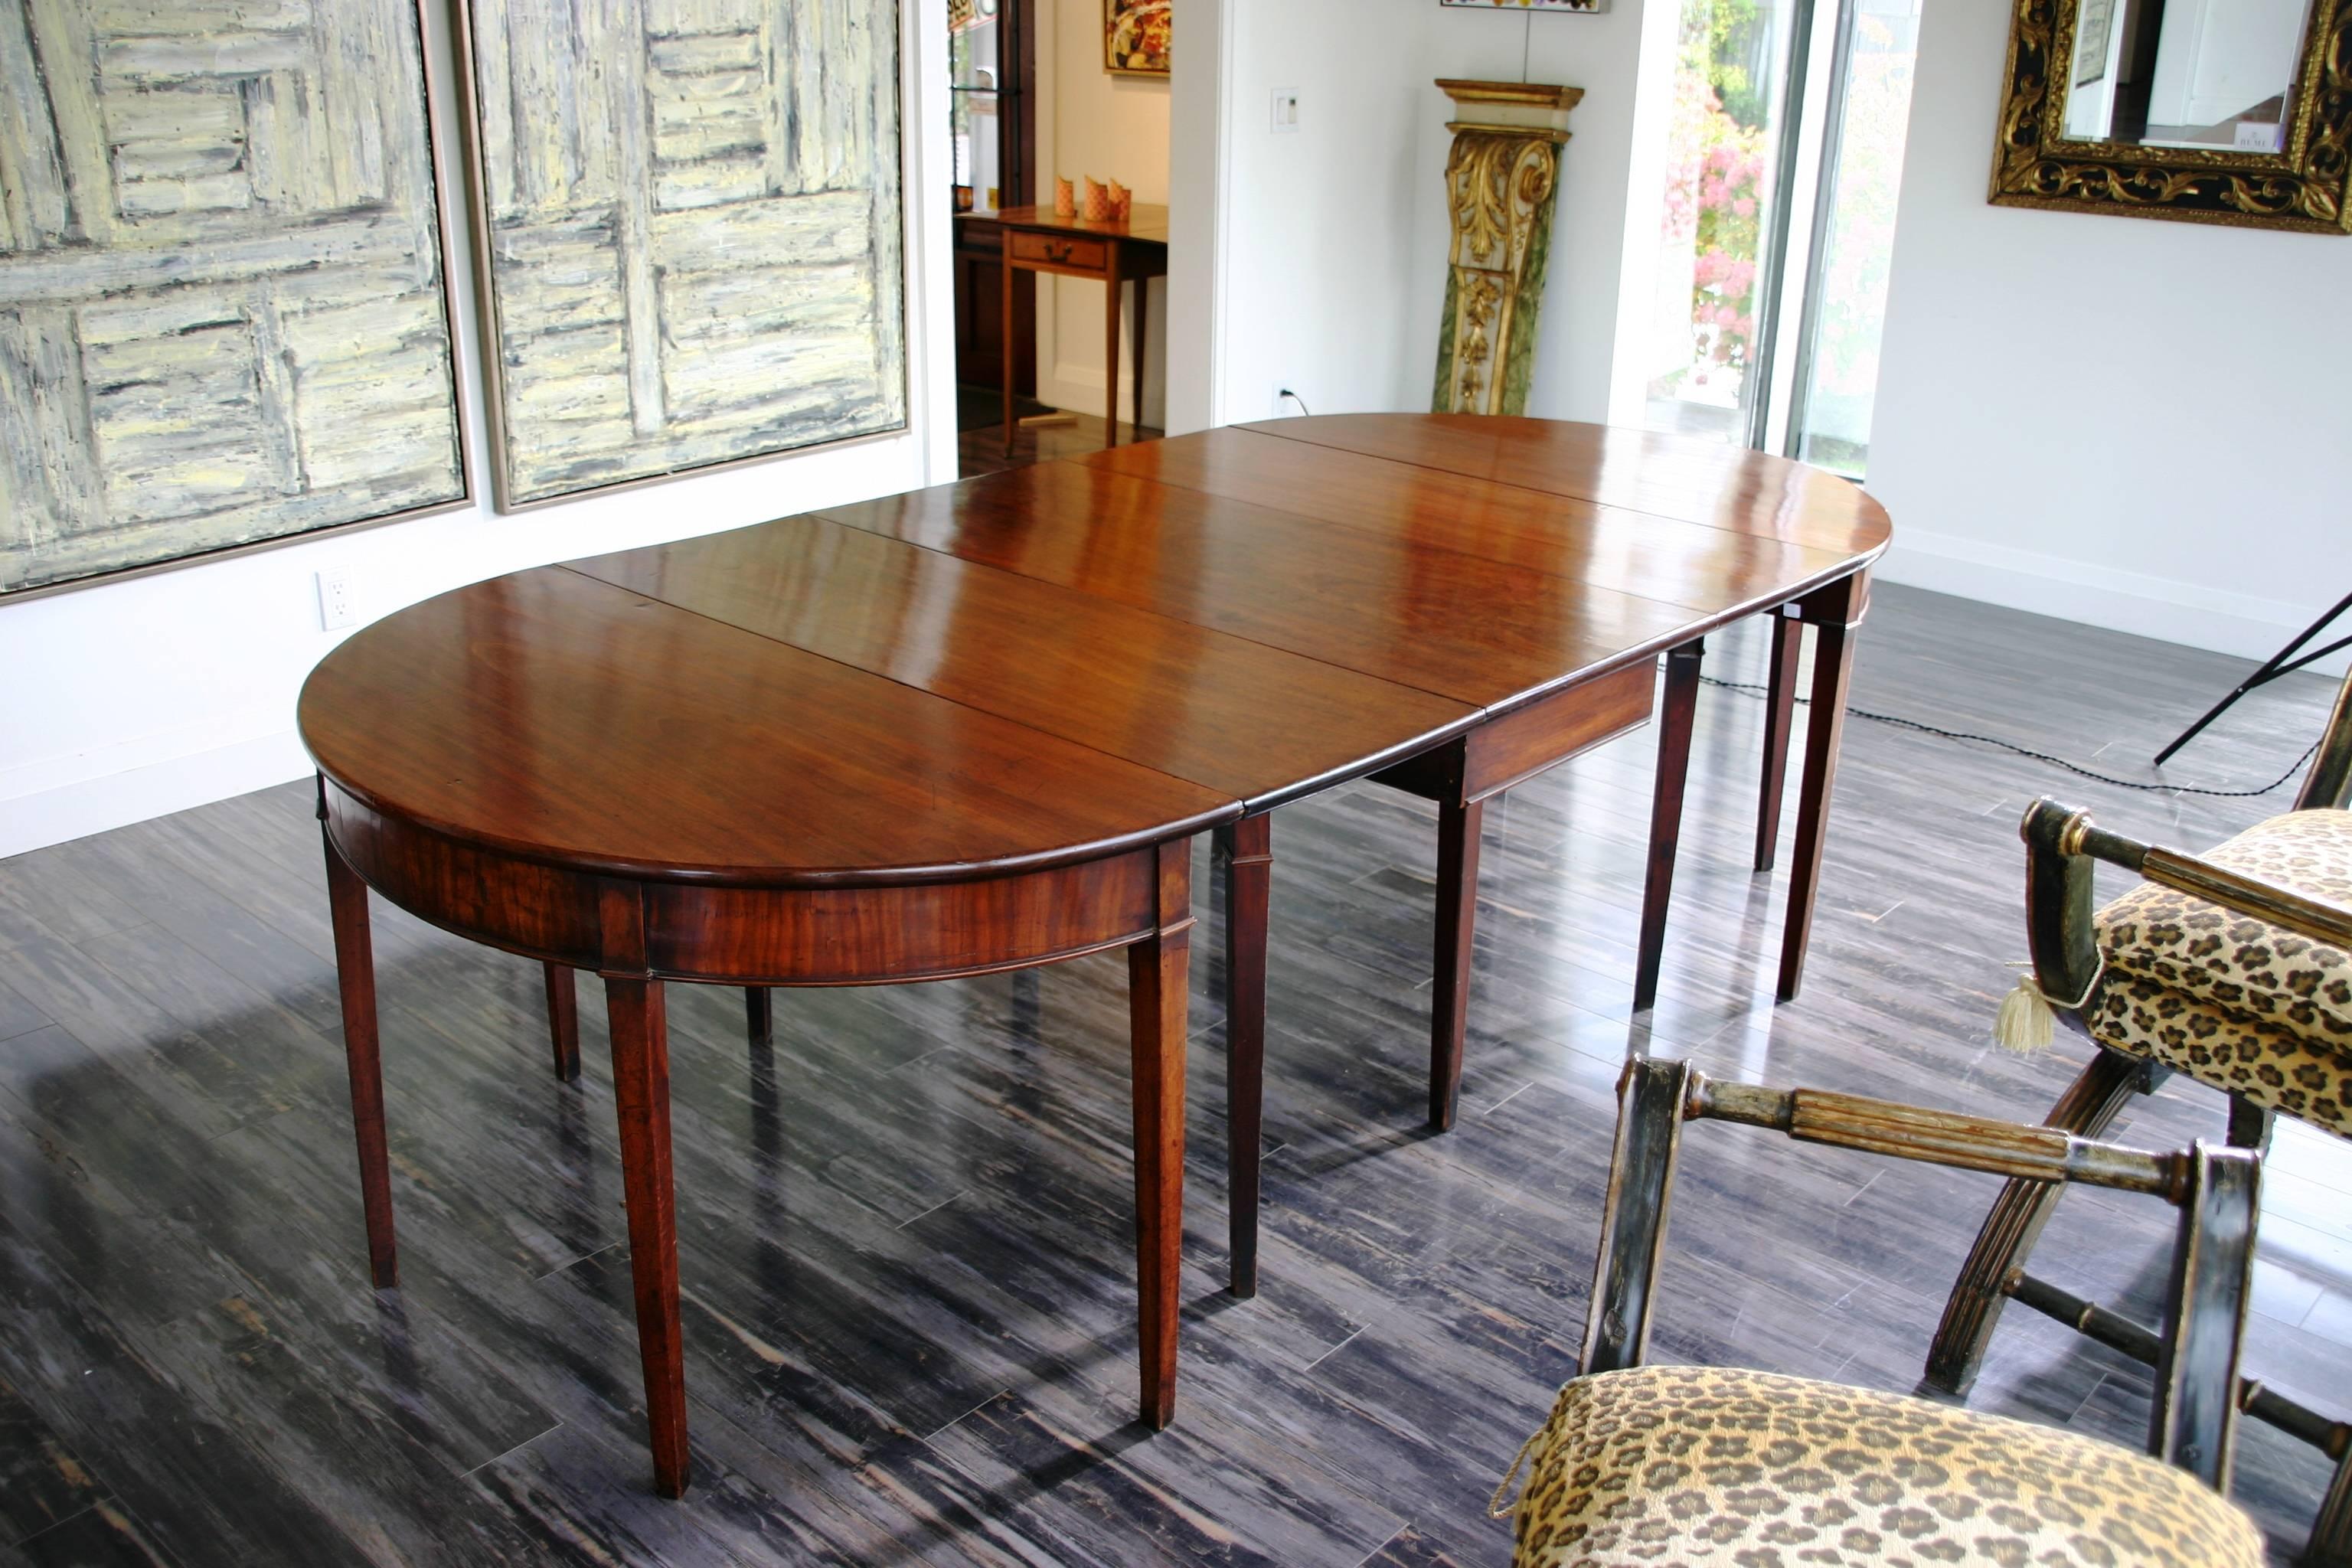 This table was purchased from Renowned Keils of Broadway UK in the mid-1780s
The original bill of sale is available on purchase.
The top boards are all superb old growth Cuban mahogany timbers retaining the old original wax finish patiantion. The